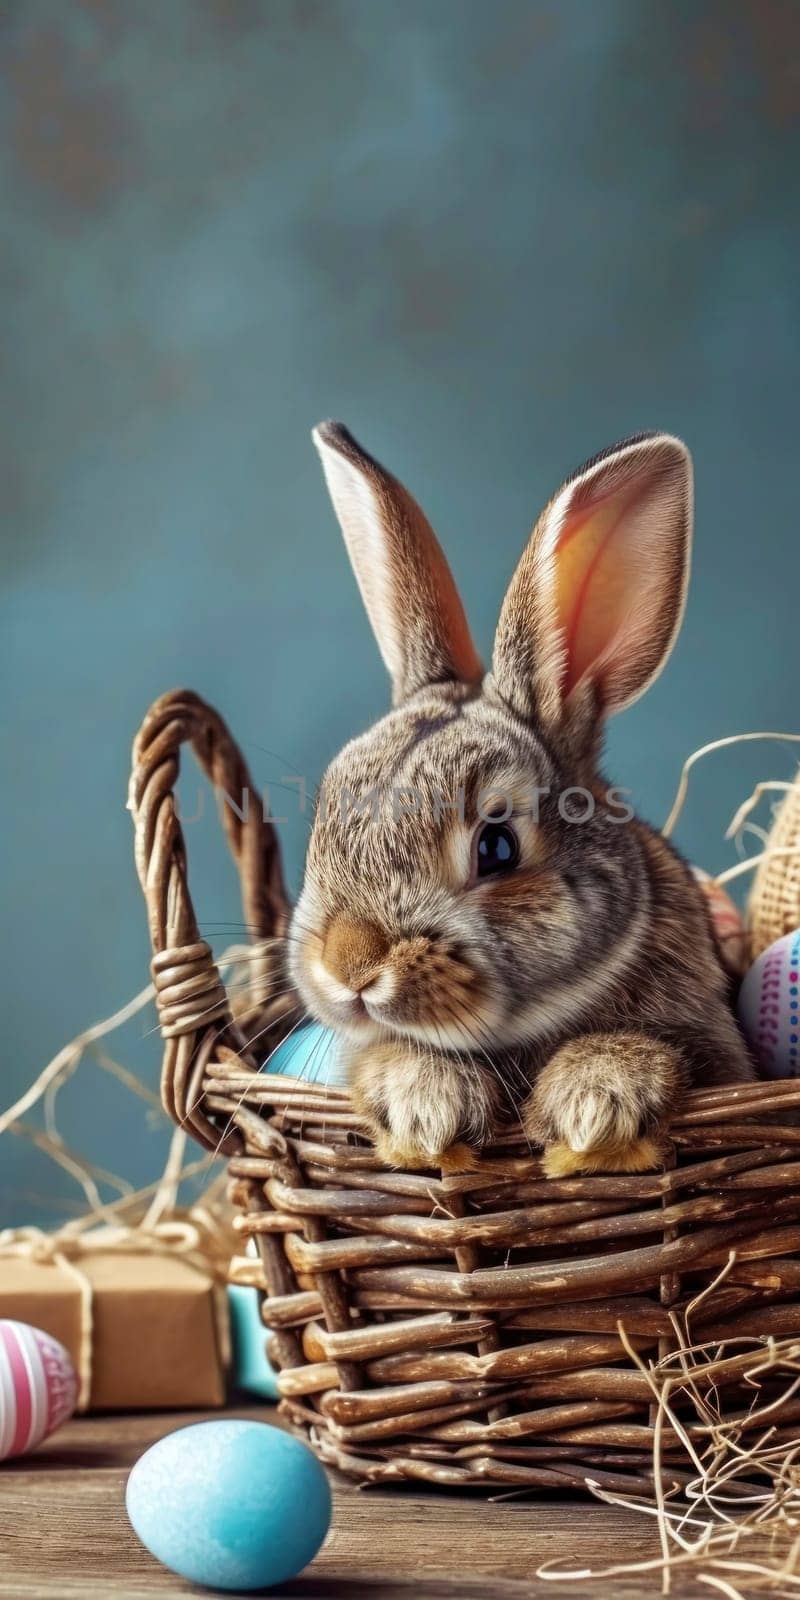 Adorable grey bunny sitting in a wicker basket filled with colorful Easter eggs on a rustic wooden surface against a blue backdrop.